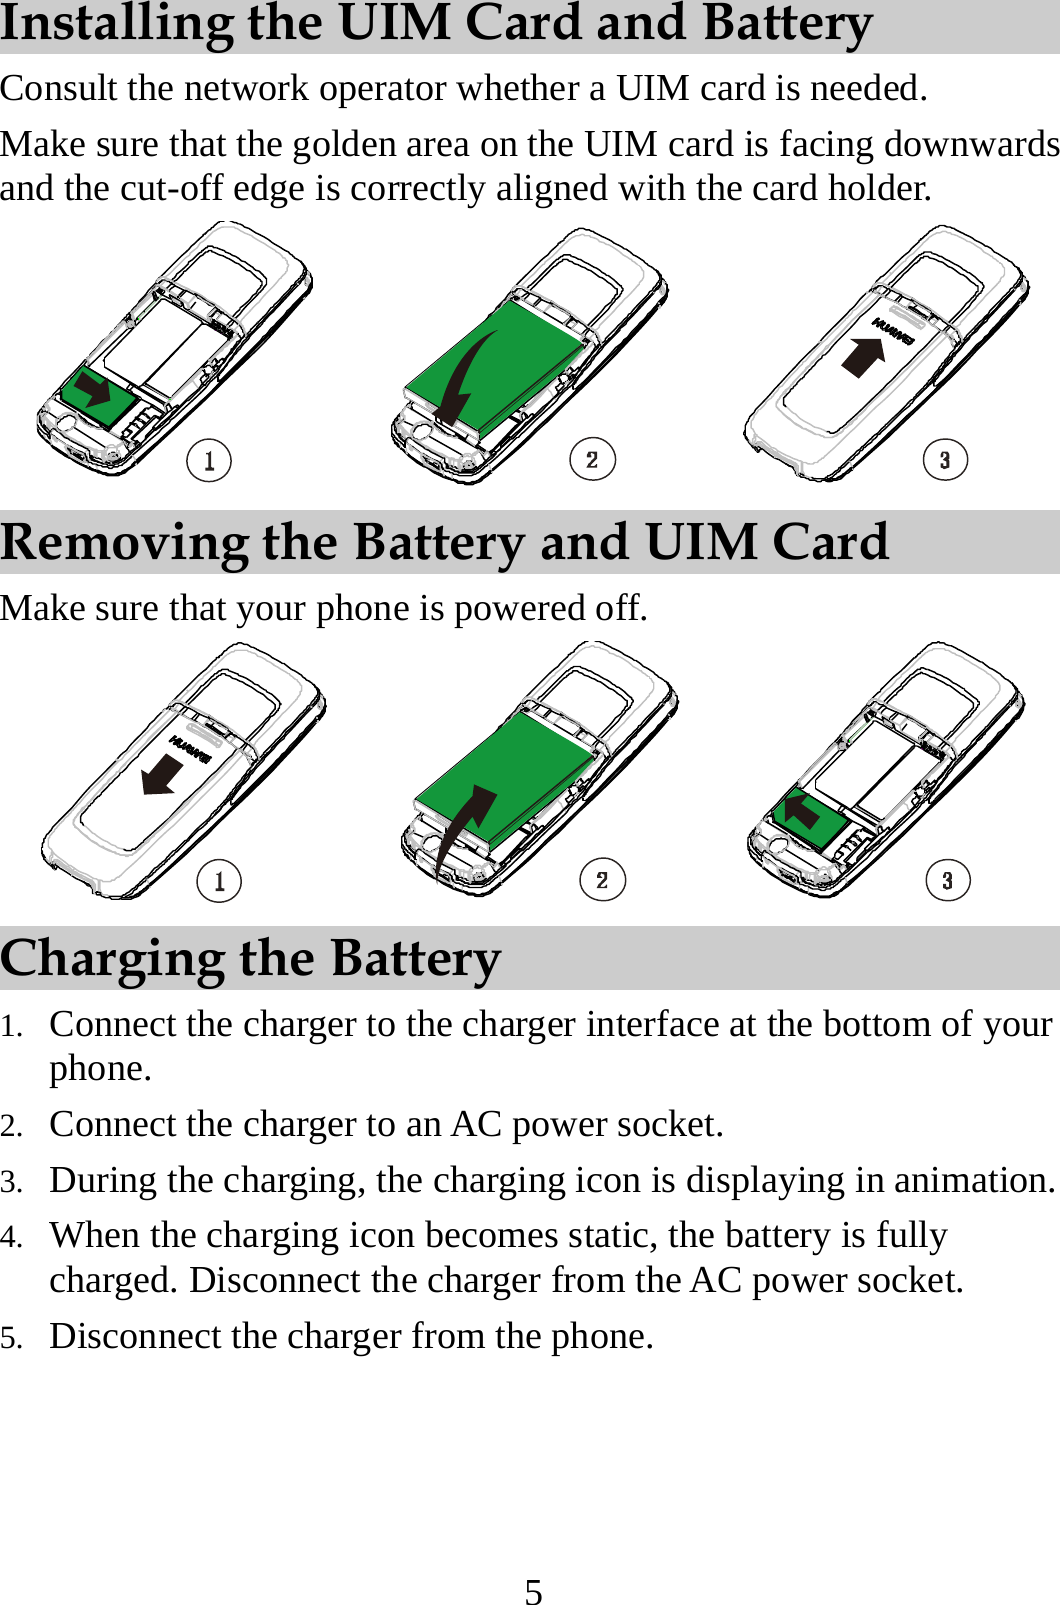 5 Installing the UIM Card and Battery Consult the network operator whether a UIM card is needed. Make sure that the golden area on the UIM card is facing downwards and the cut-off edge is correctly aligned with the card holder.  Removing the Battery and UIM Card Make sure that your phone is powered off.  Charging the Battery 1. Connect the charger to the charger interface at the bottom of your phone. 2. Connect the charger to an AC power socket. 3. During the charging, the charging icon is displaying in animation. 4. When the charging icon becomes static, the battery is fully charged. Disconnect the charger from the AC power socket. 5. Disconnect the charger from the phone. 